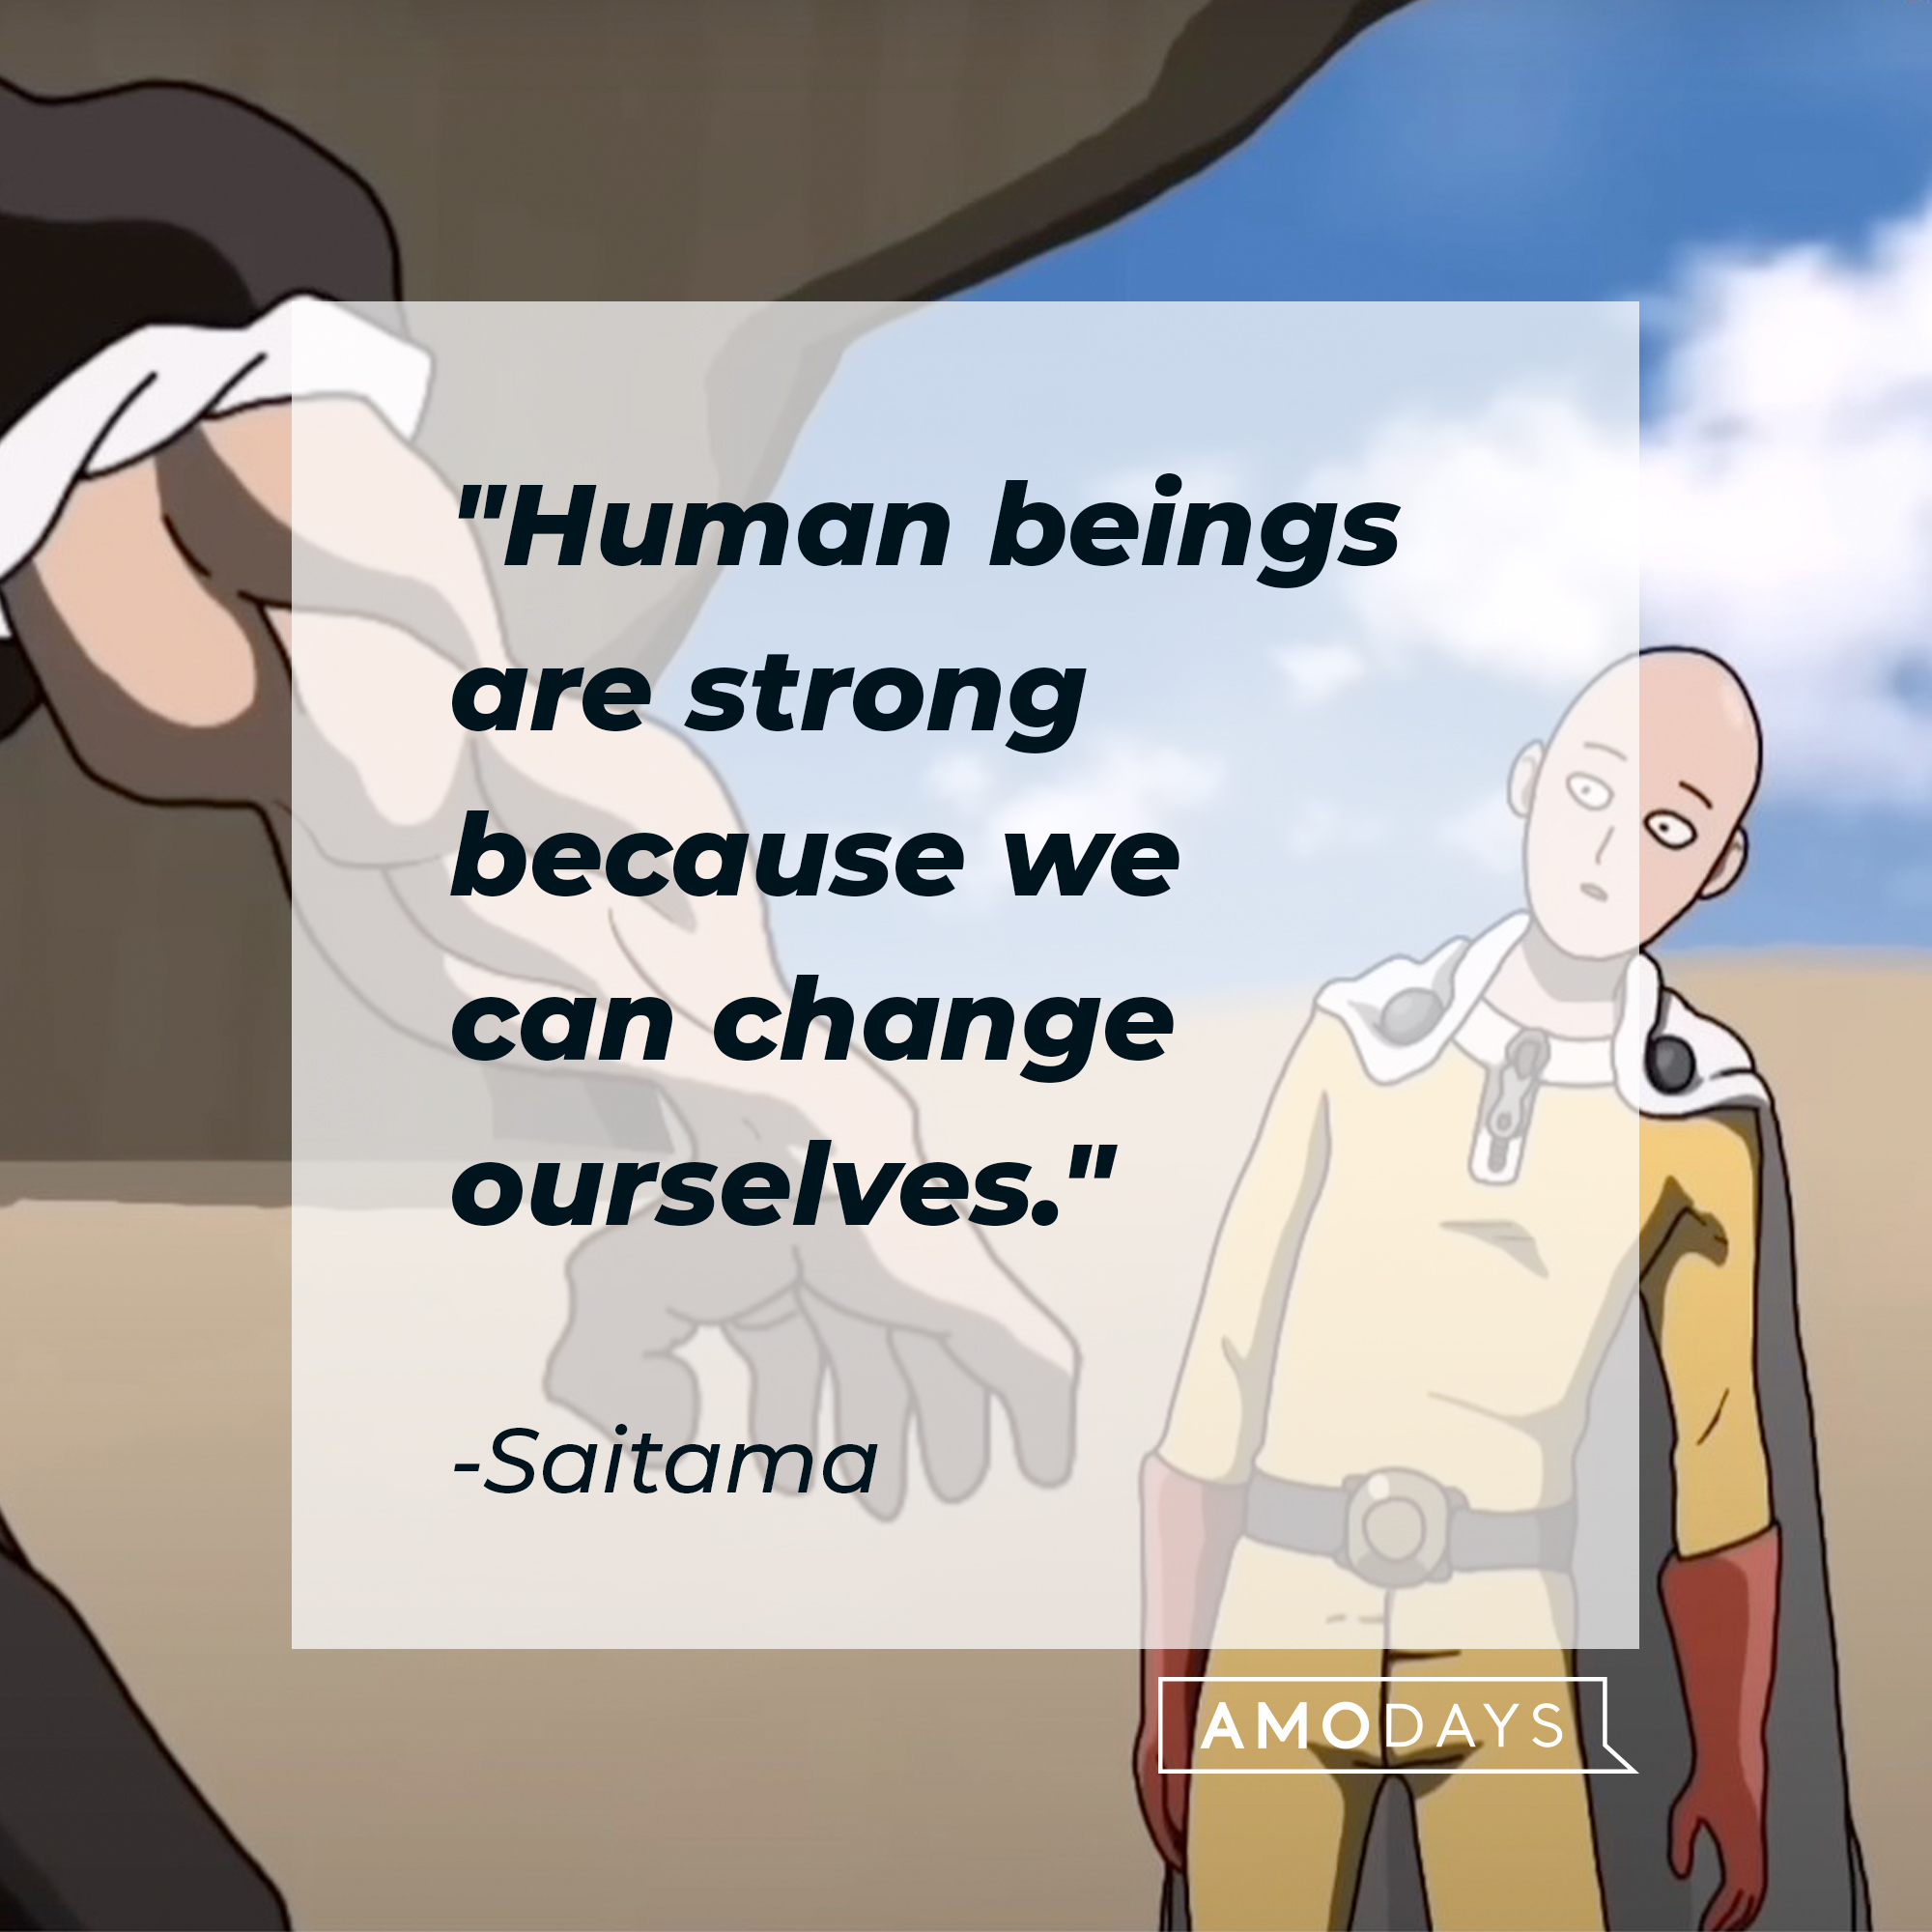 Saitama's quote: "Human beings are strong because we can change ourselves." | Source: Facebook.com/OnePunchManMobileSEAEN